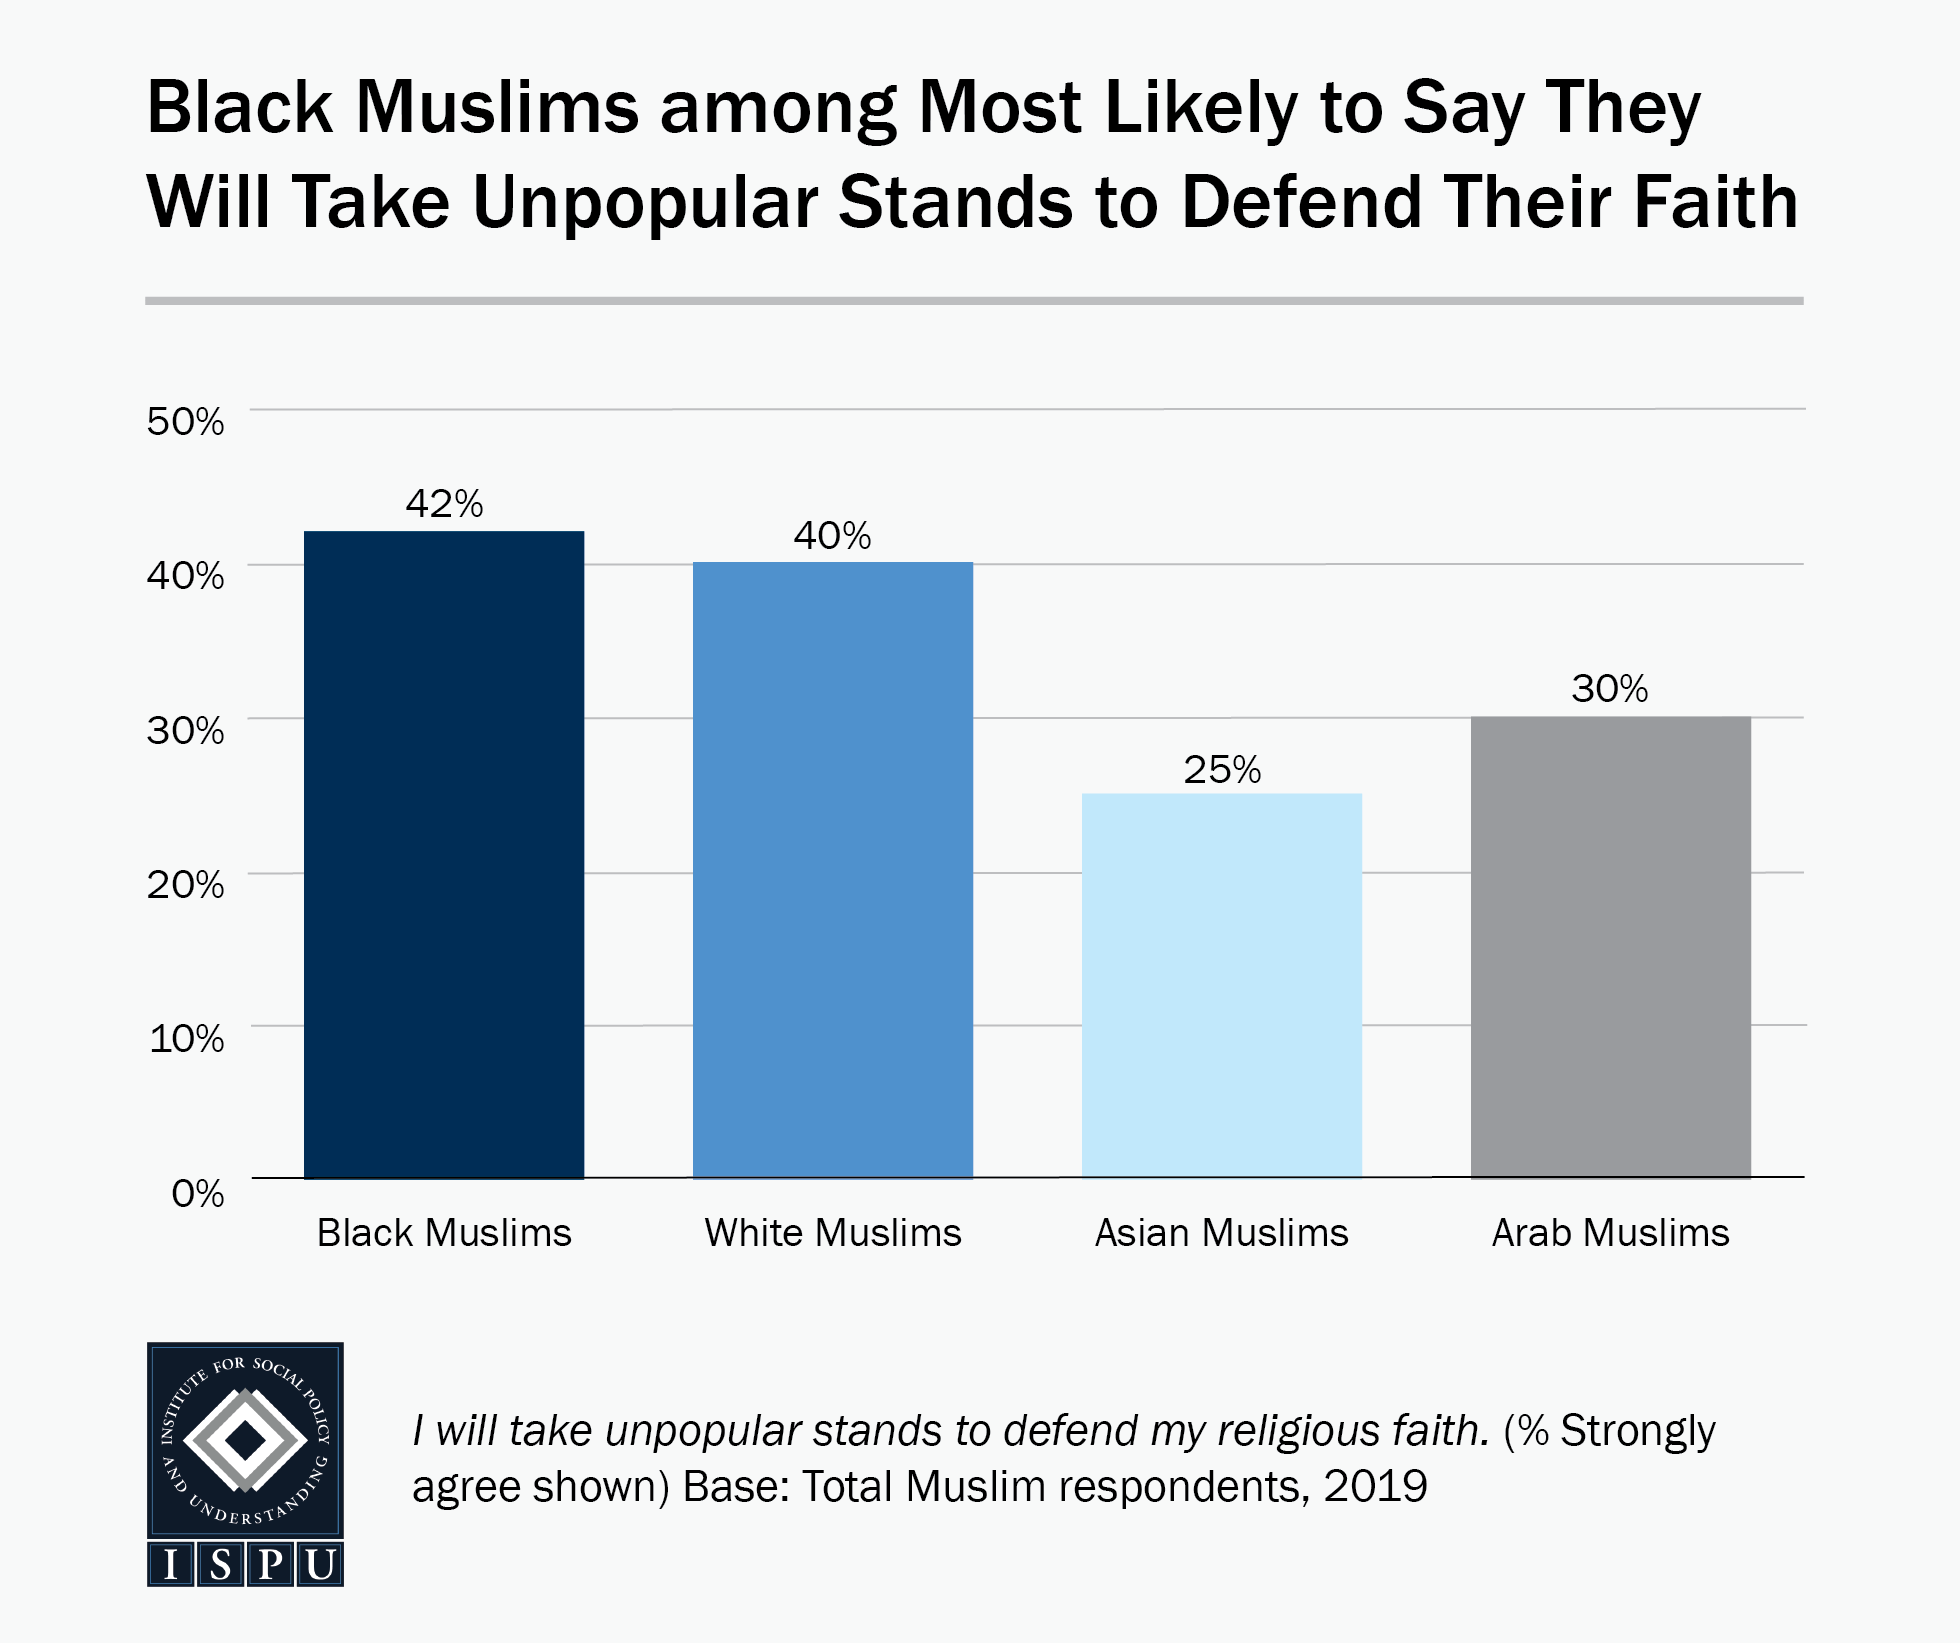 A bar graph showing that Black Muslims (42%) are among the most likely to say they will take unpopular stands to defend their faith